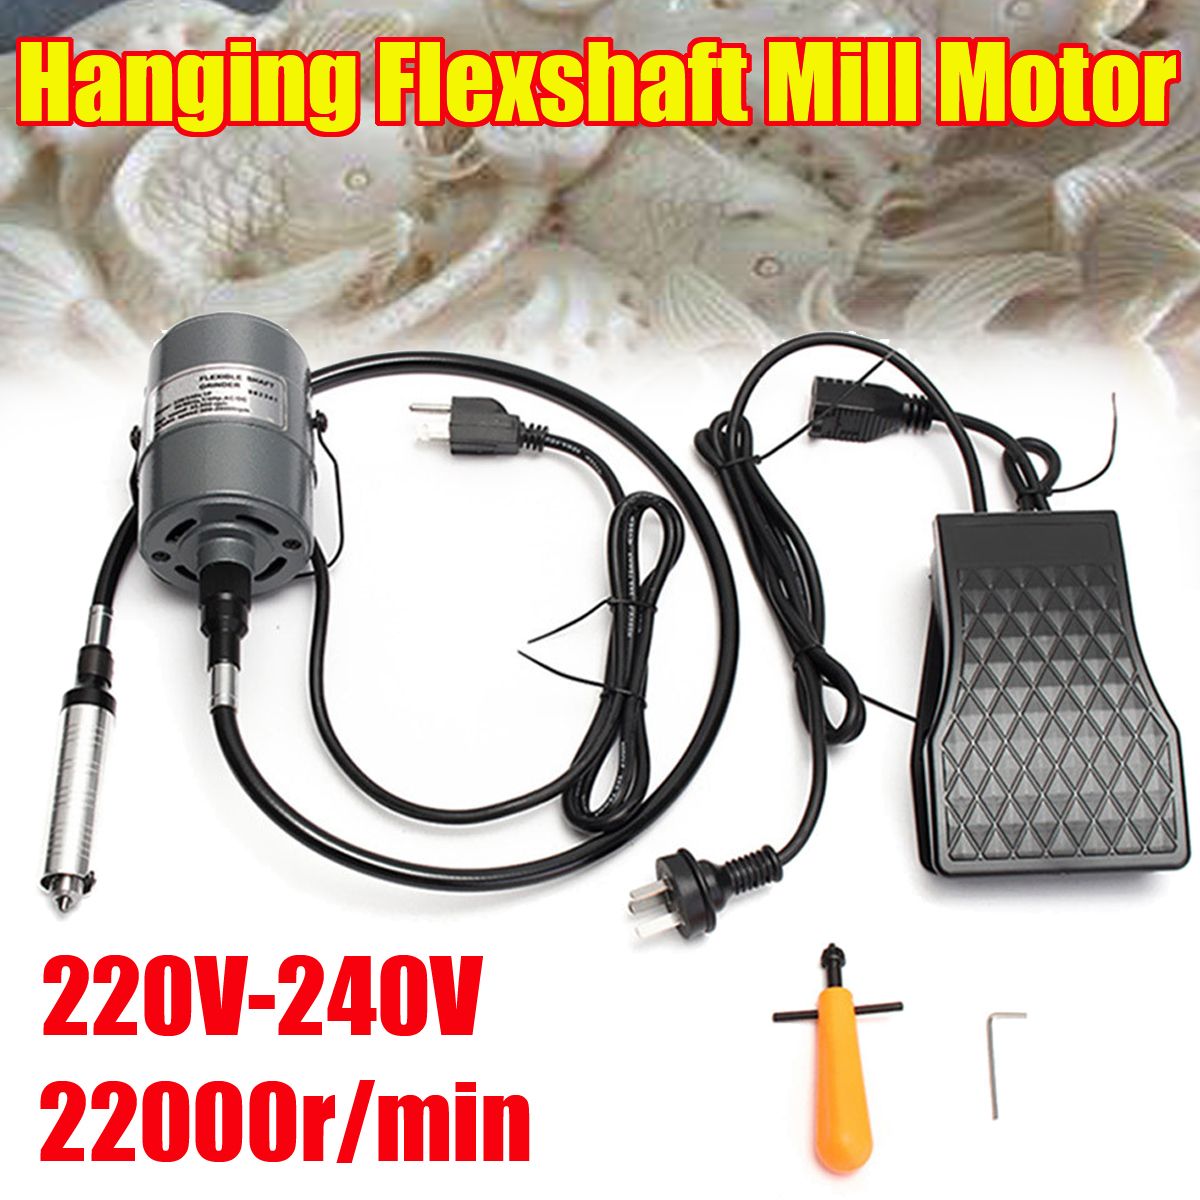 220-240V-4mm-Hanging-Flexible-Shaft-Mill-Motor-For-Jewelry-Design-amp-Repair-Tools-Kits-22000rpm-1385812